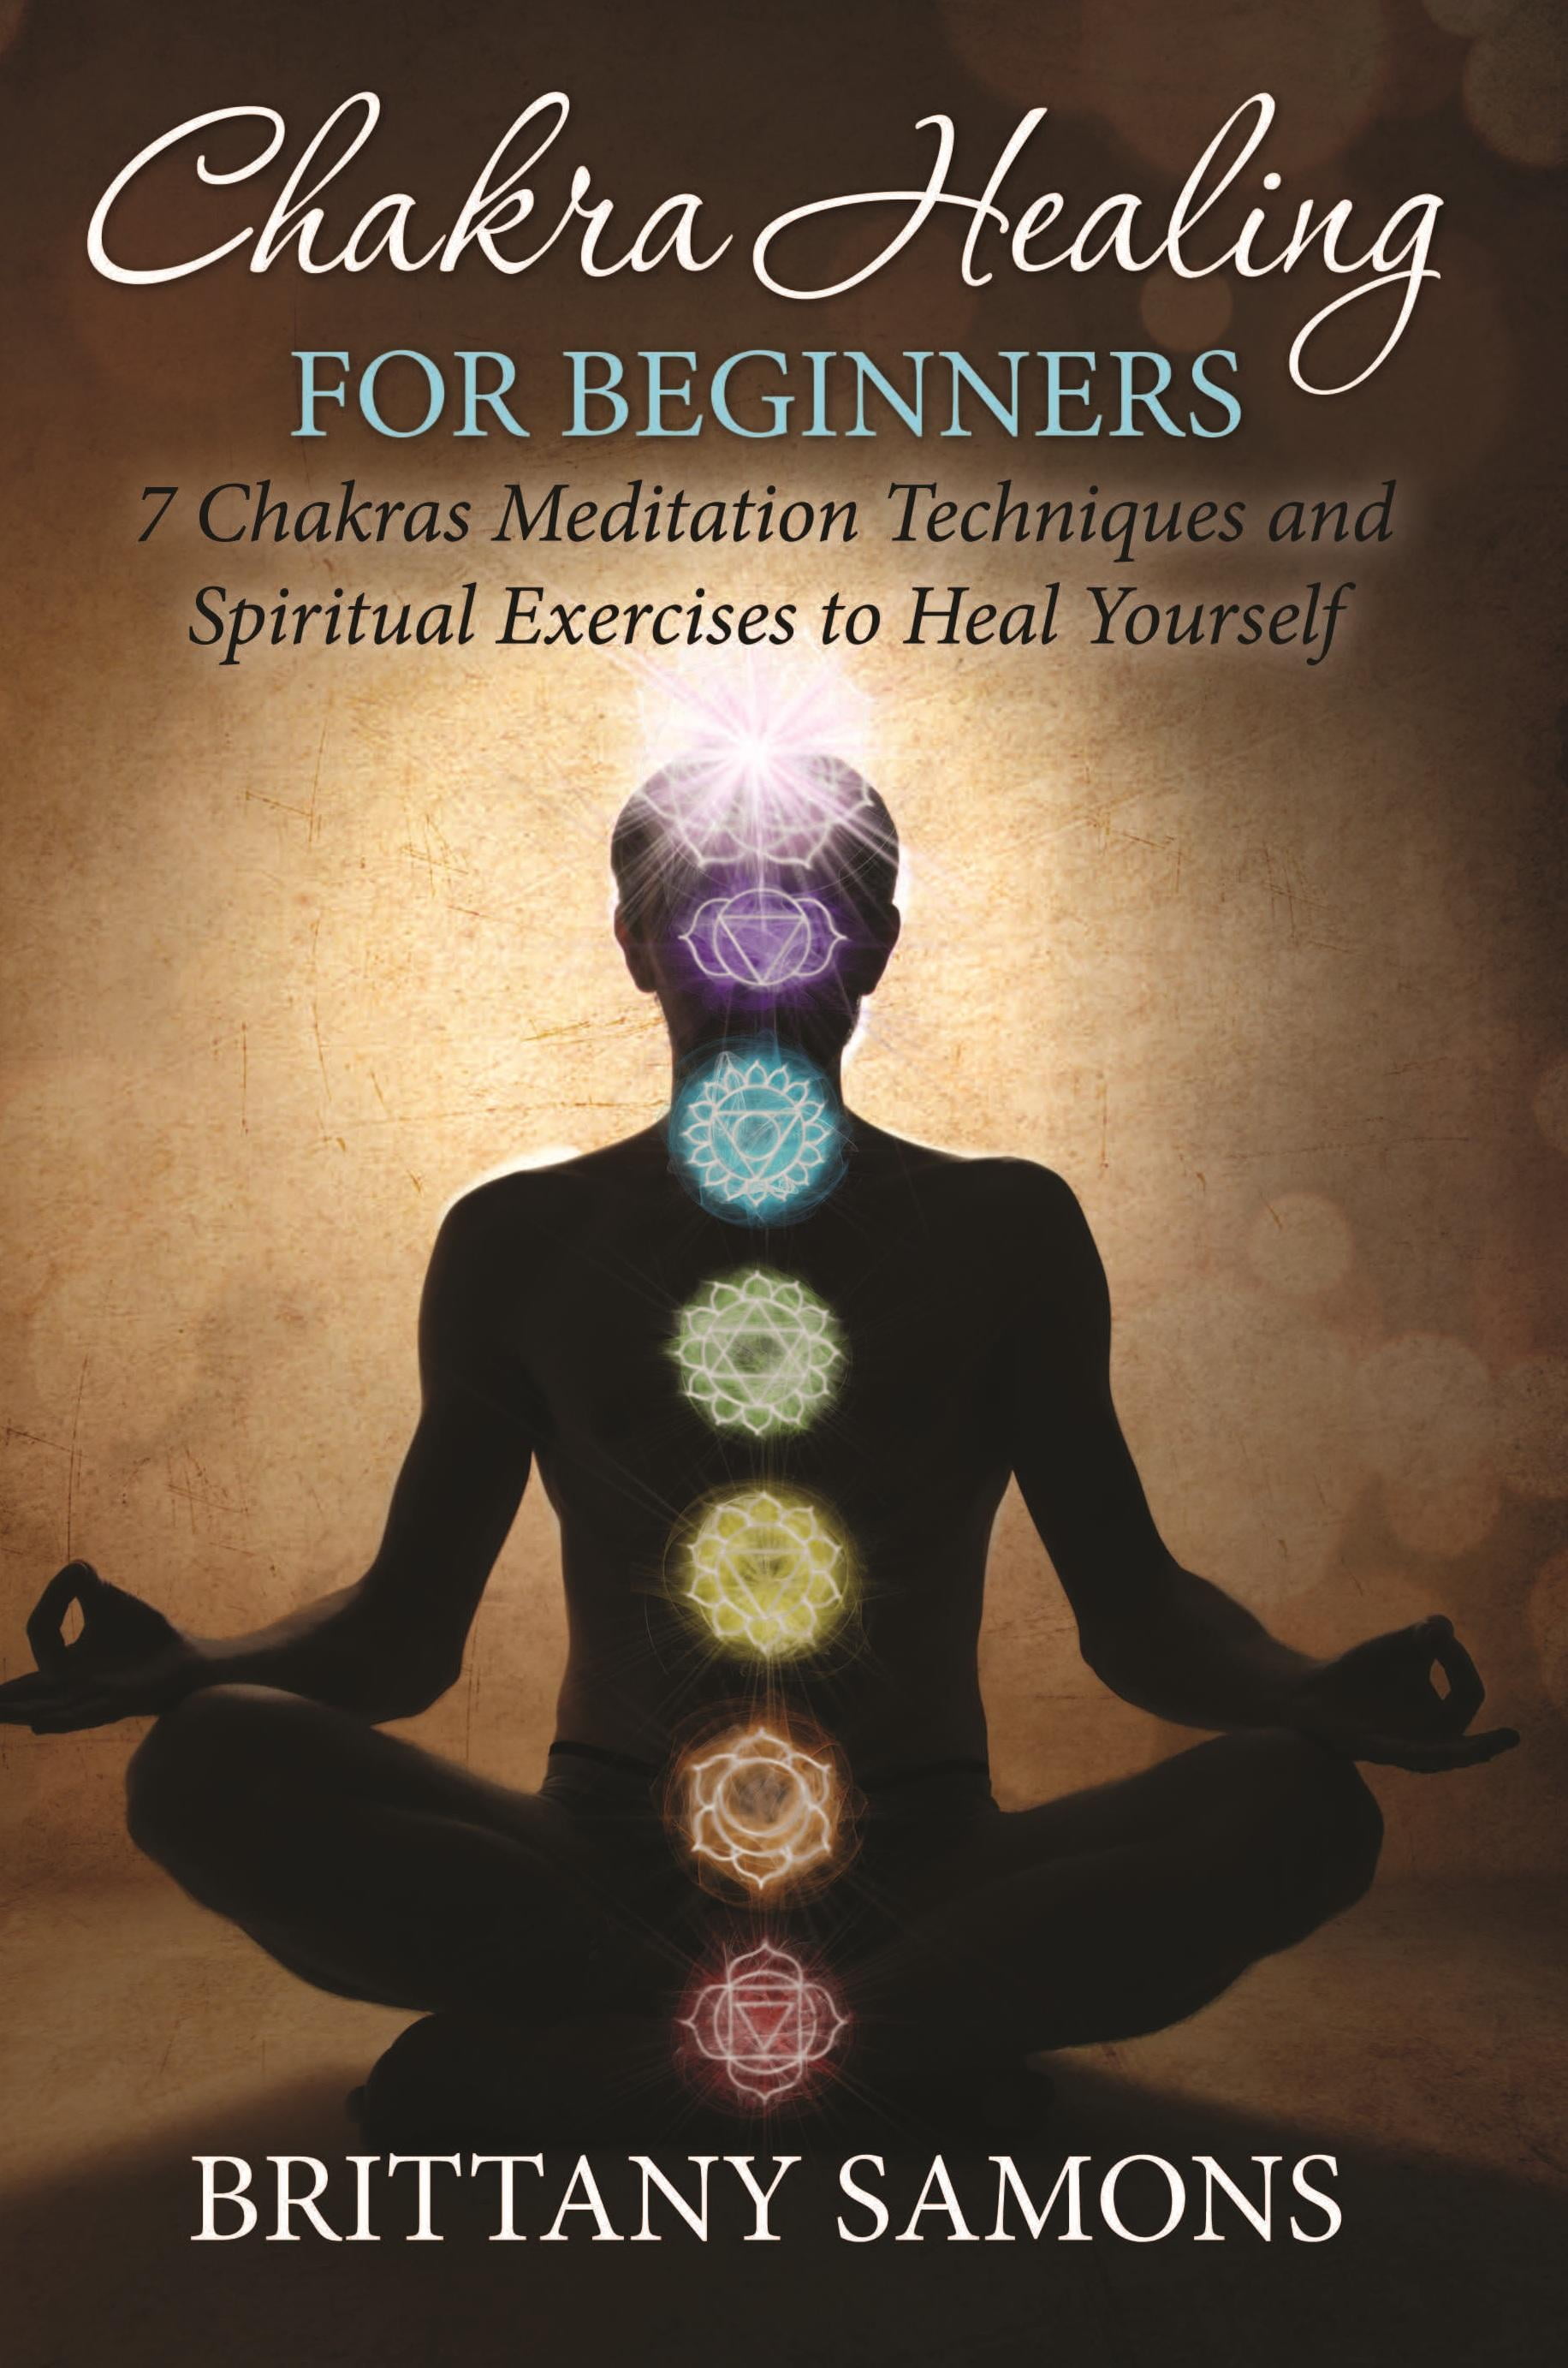 Chakra Healing For Beginners: 7 Chakras Meditation Techniques and